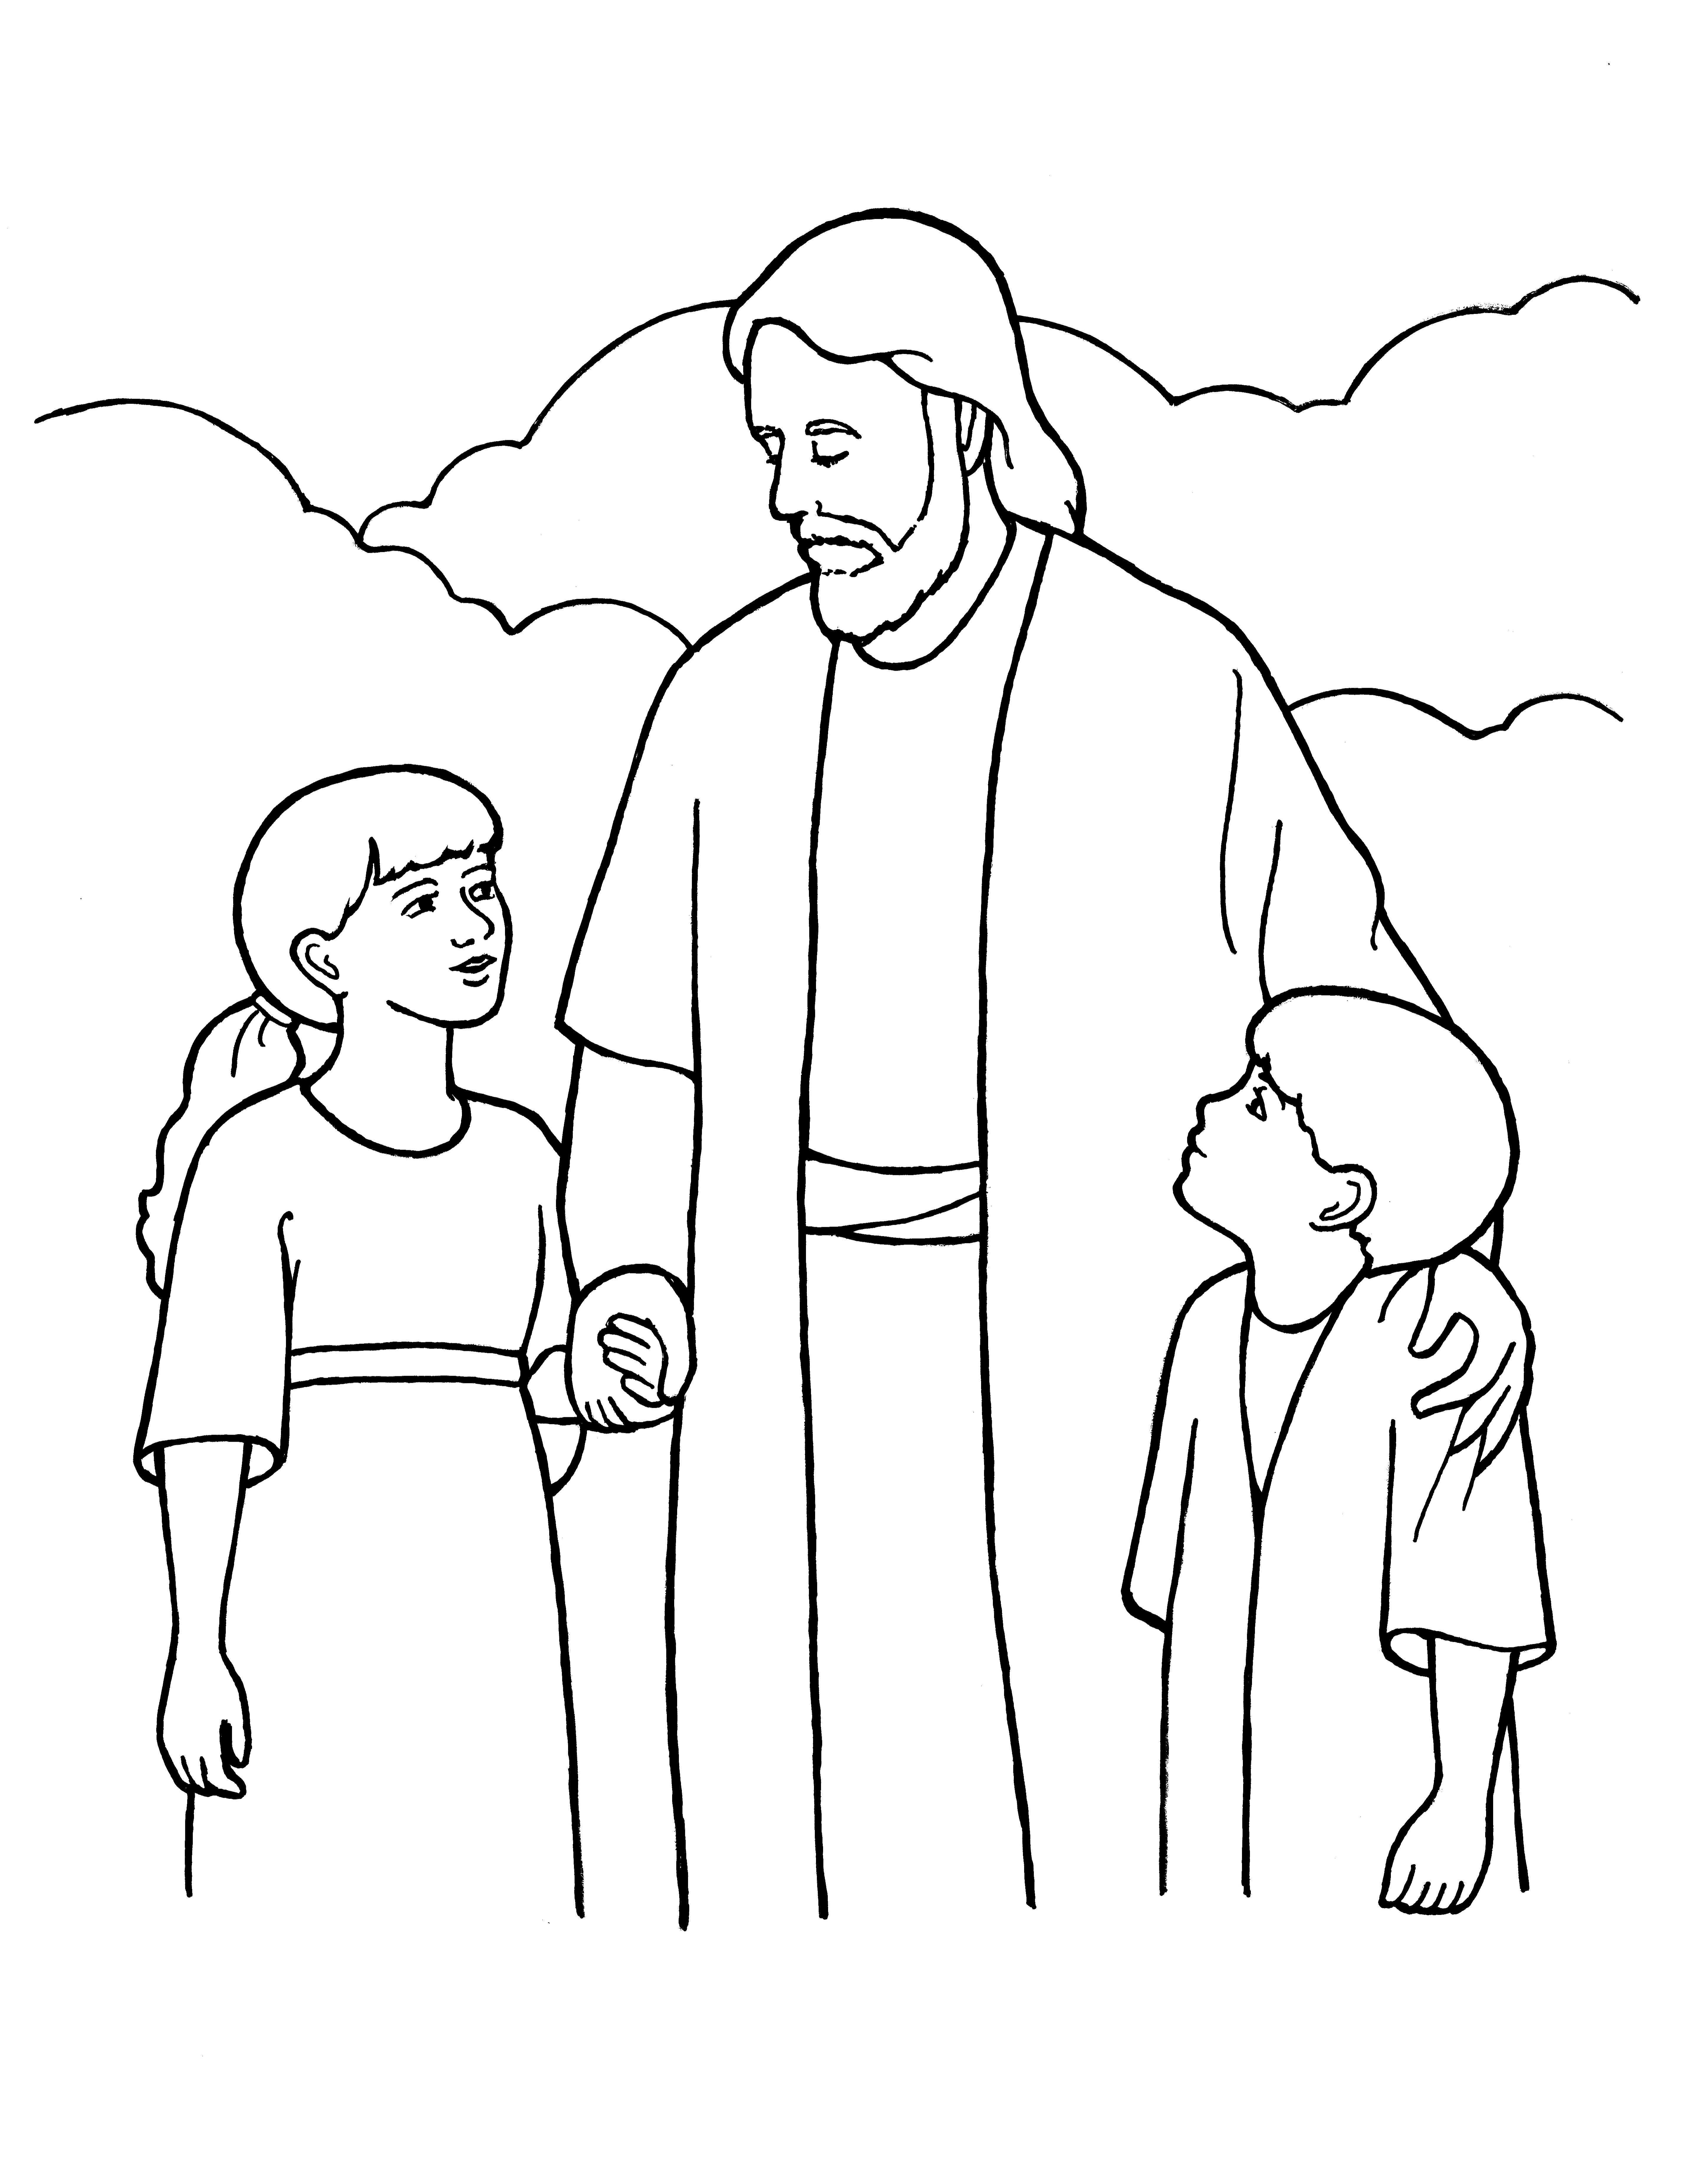 Drawing Jesus Children Playing PNG Images | PSD Free Download - Pikbest